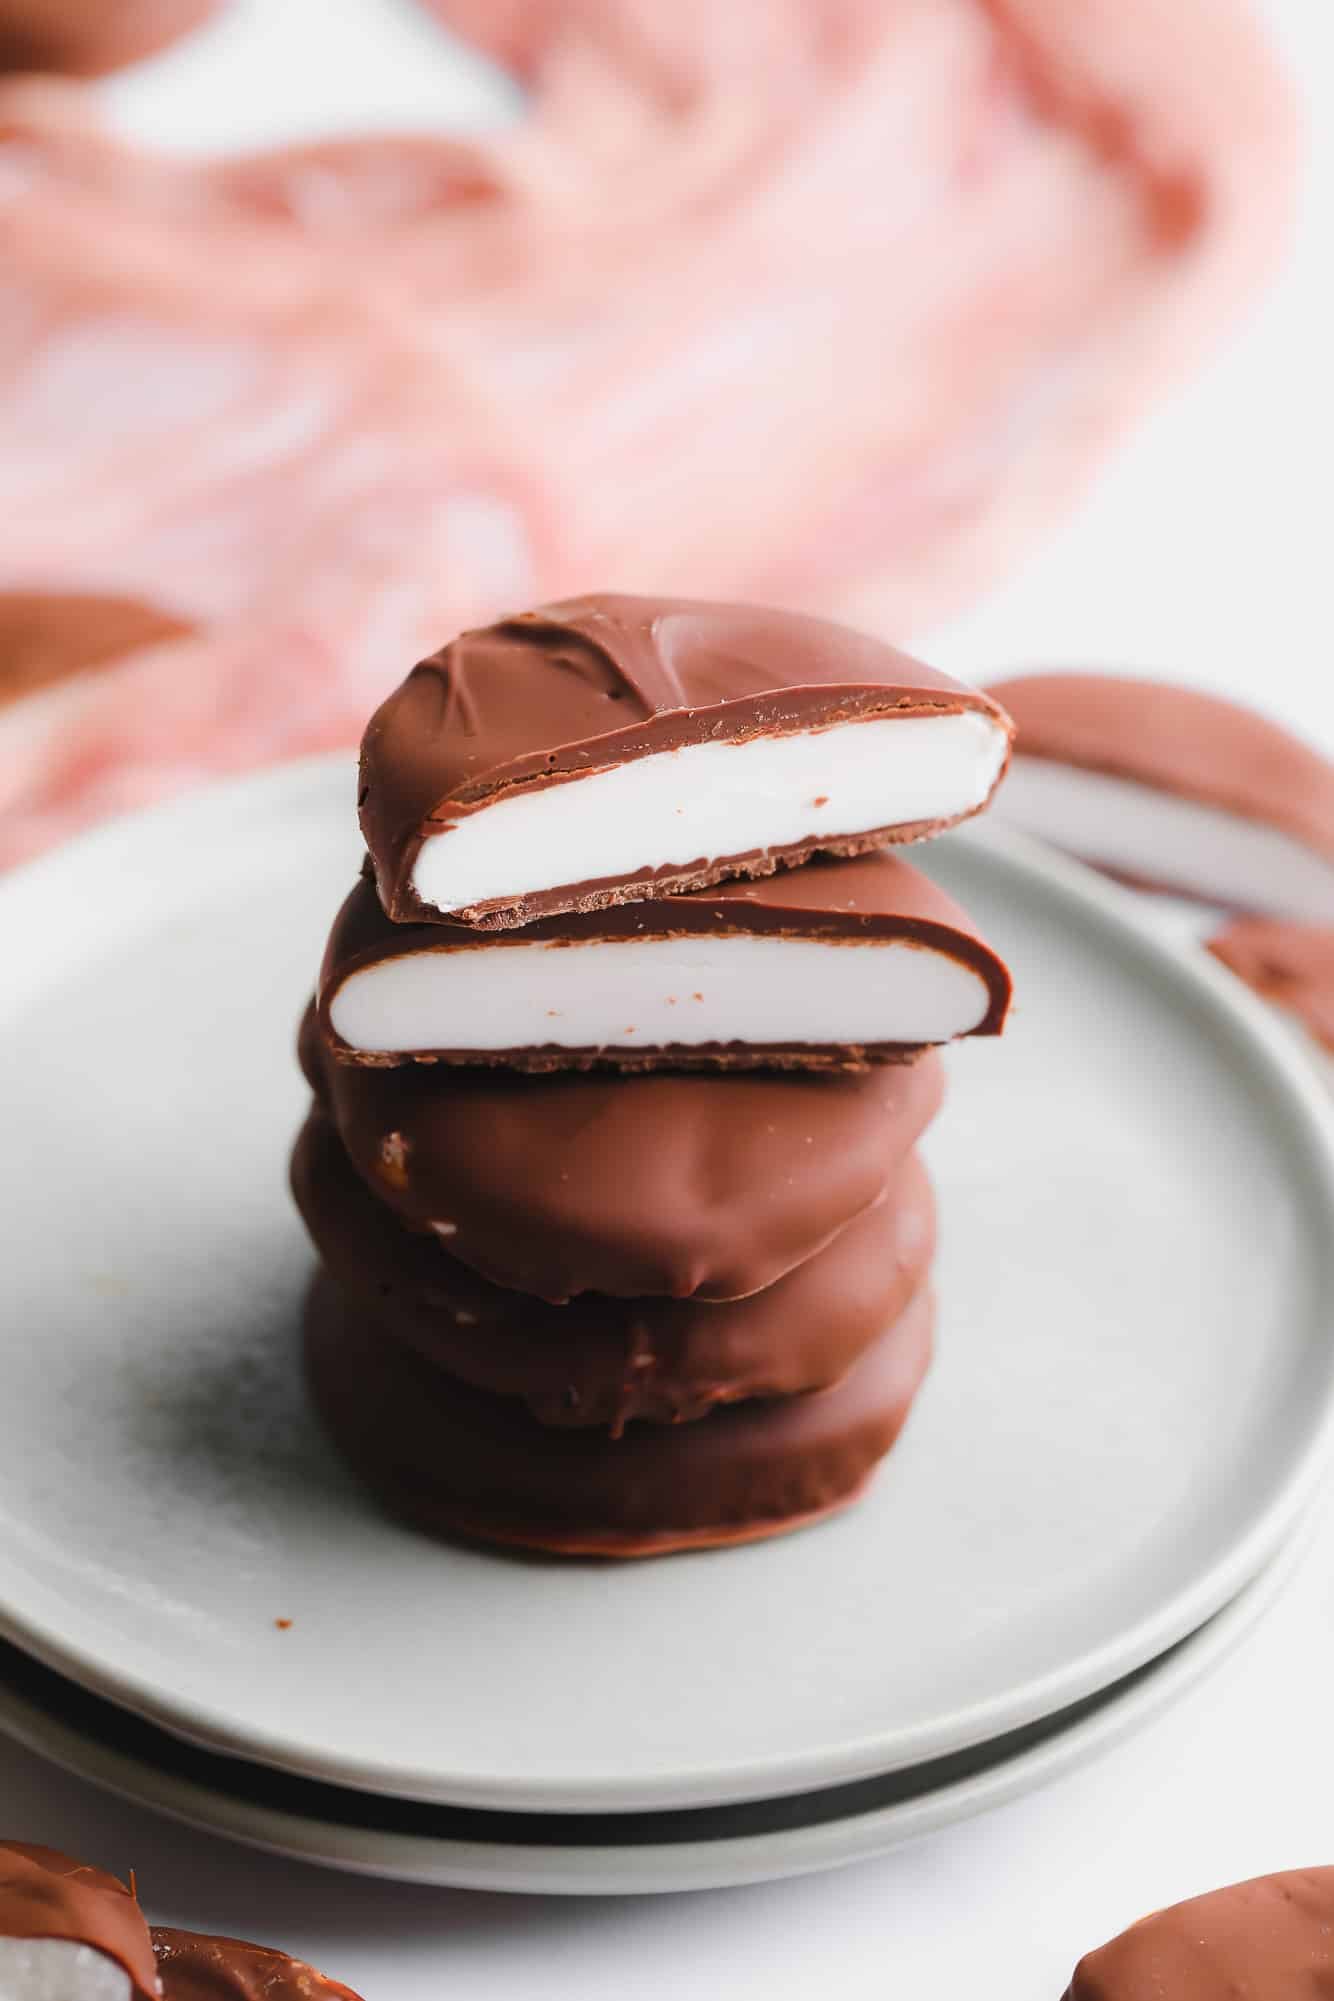 A stack of vegan peppermint patties cut in half on a small plate.